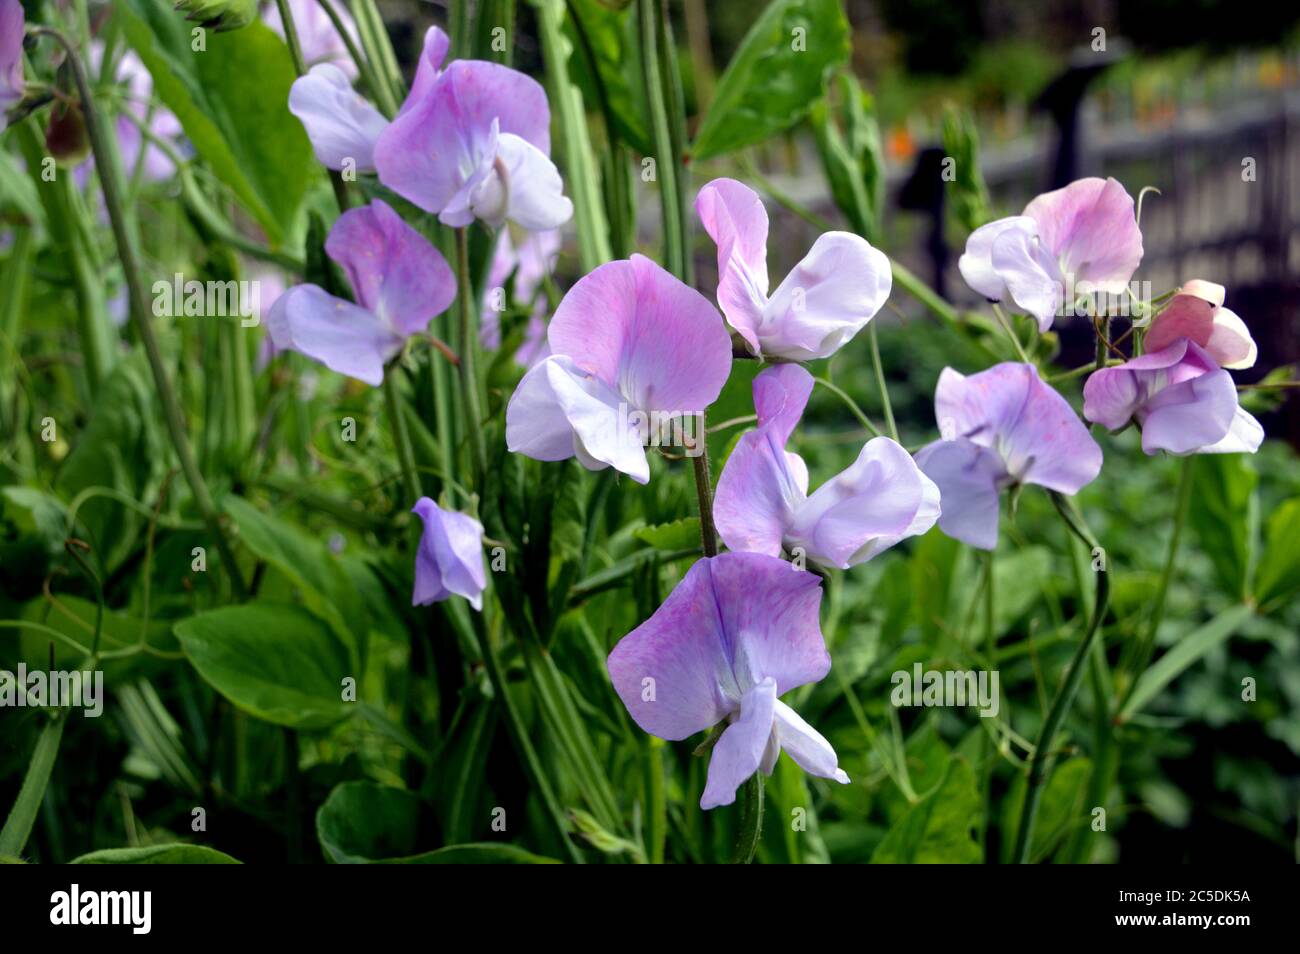 Lilac/Lavender (Lathyrus odoratus) Sweet Peas 'Great Expectations' Flowers grown in the  borders at RHS Garden Harlow Carr, Harrogate, Yorkshire, UK. Stock Photo